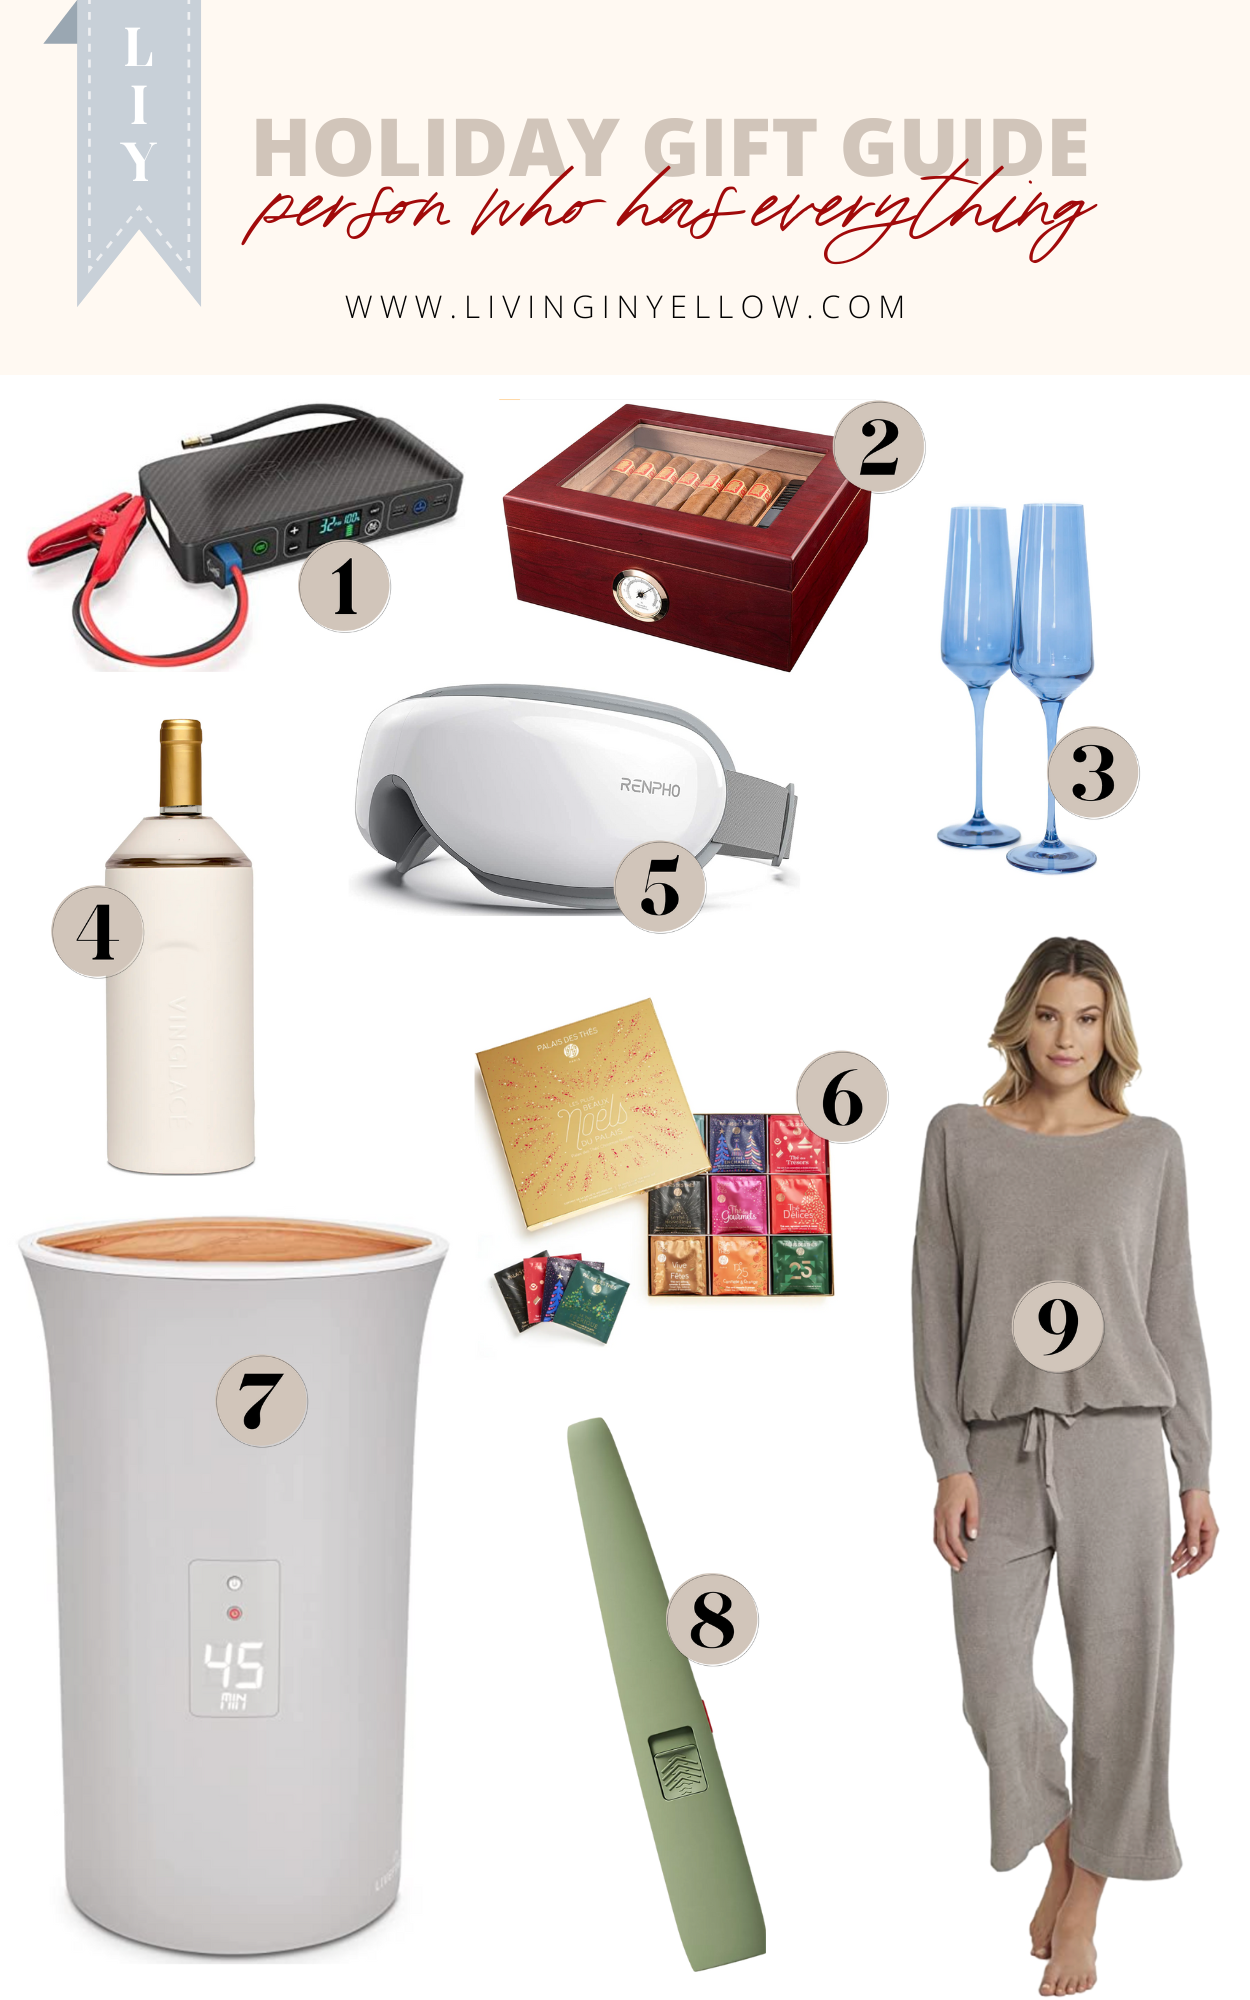 Holiday Gift Guides for Everyone - Living in Yellow